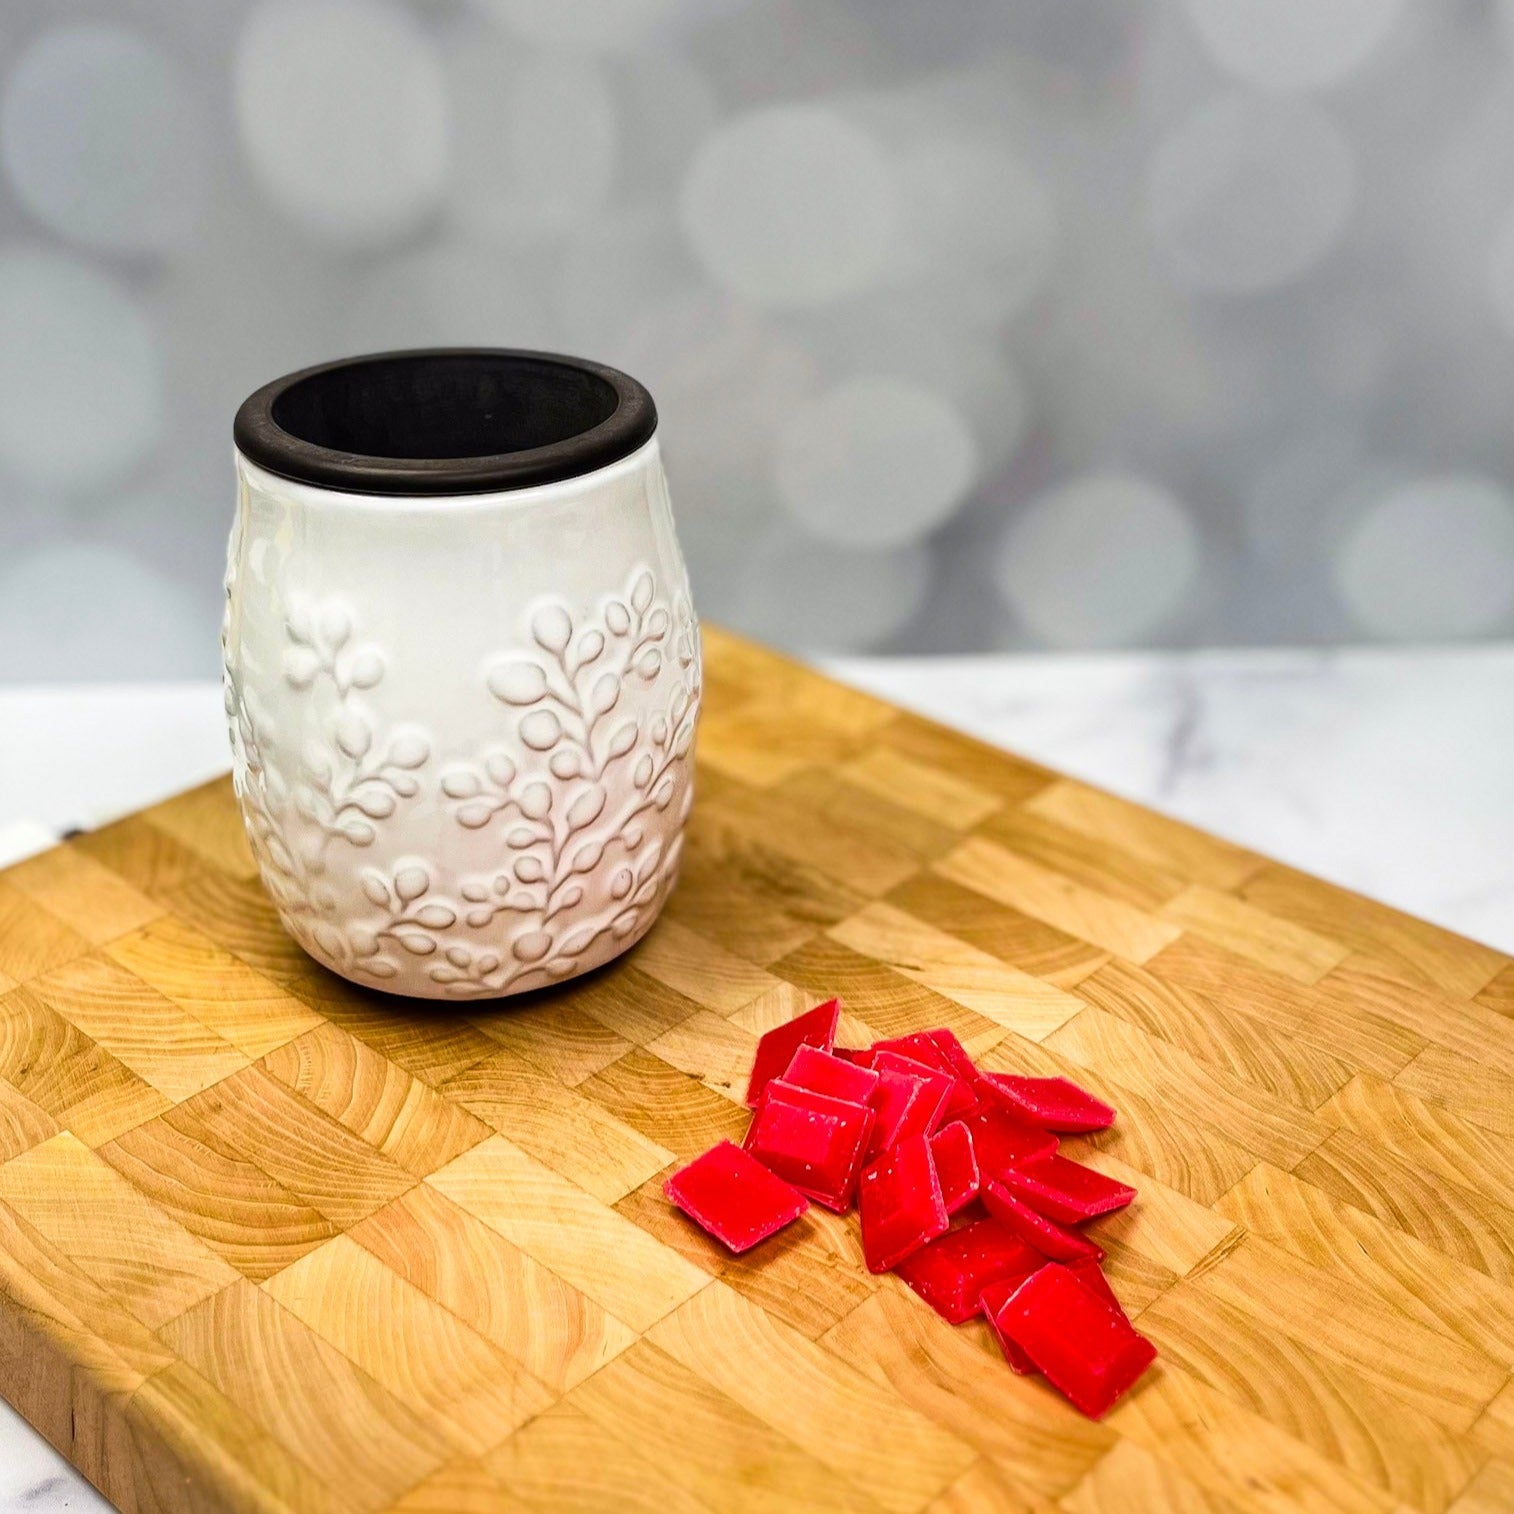 The Best Smelling Wax Melts To Make Your Home Smell Cozy, 10 Must-Try  Scents